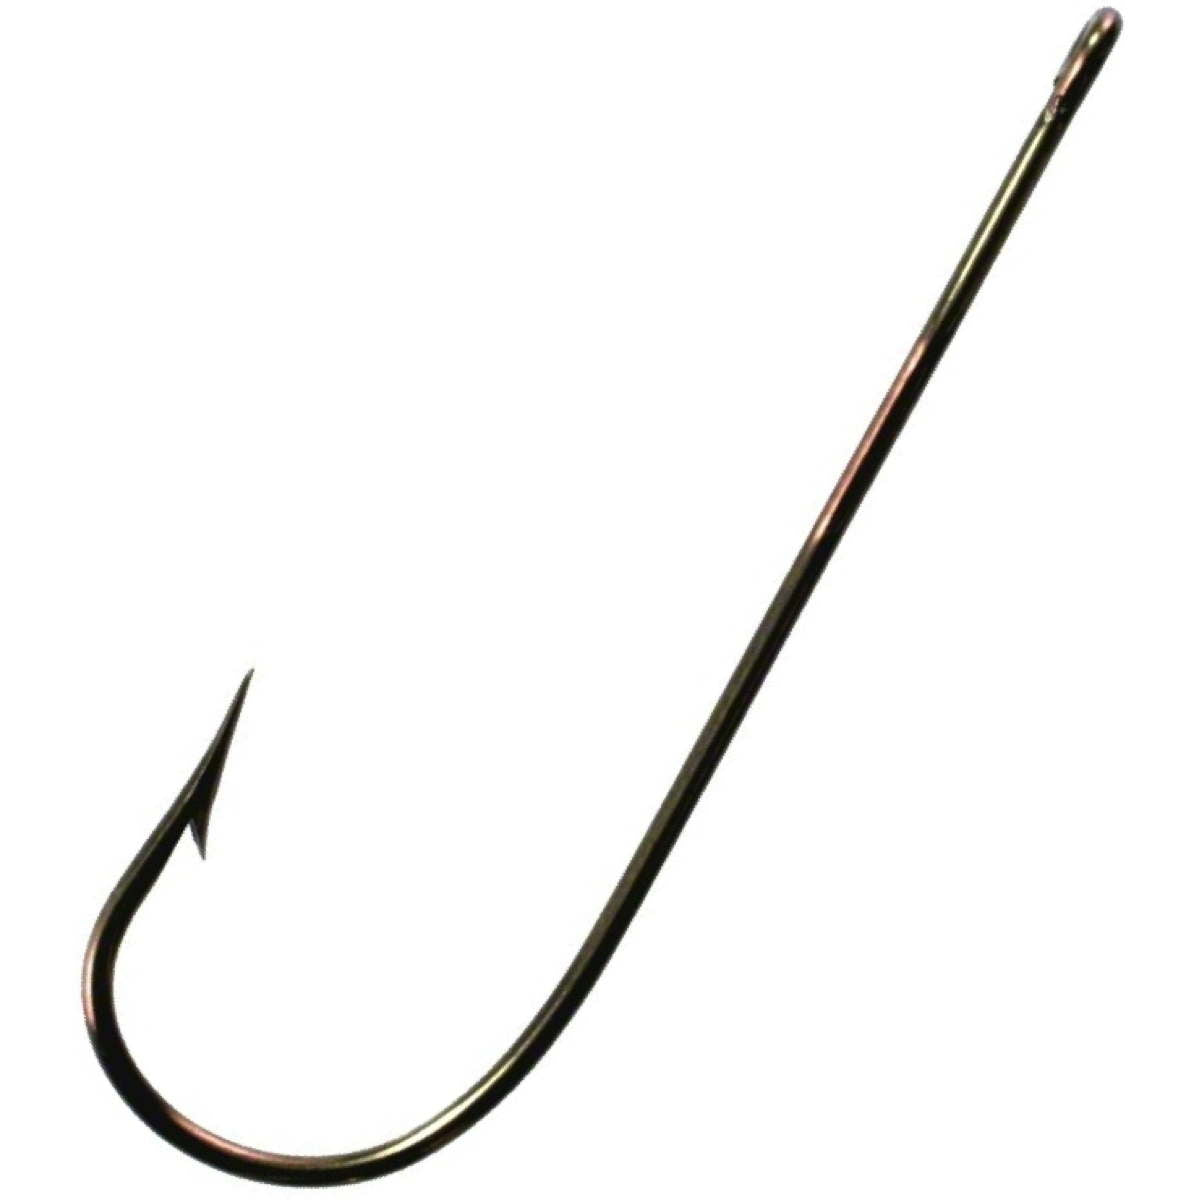 Photo of Tru-Turn Aberdeen Hooks for sale at United Tackle Shops.